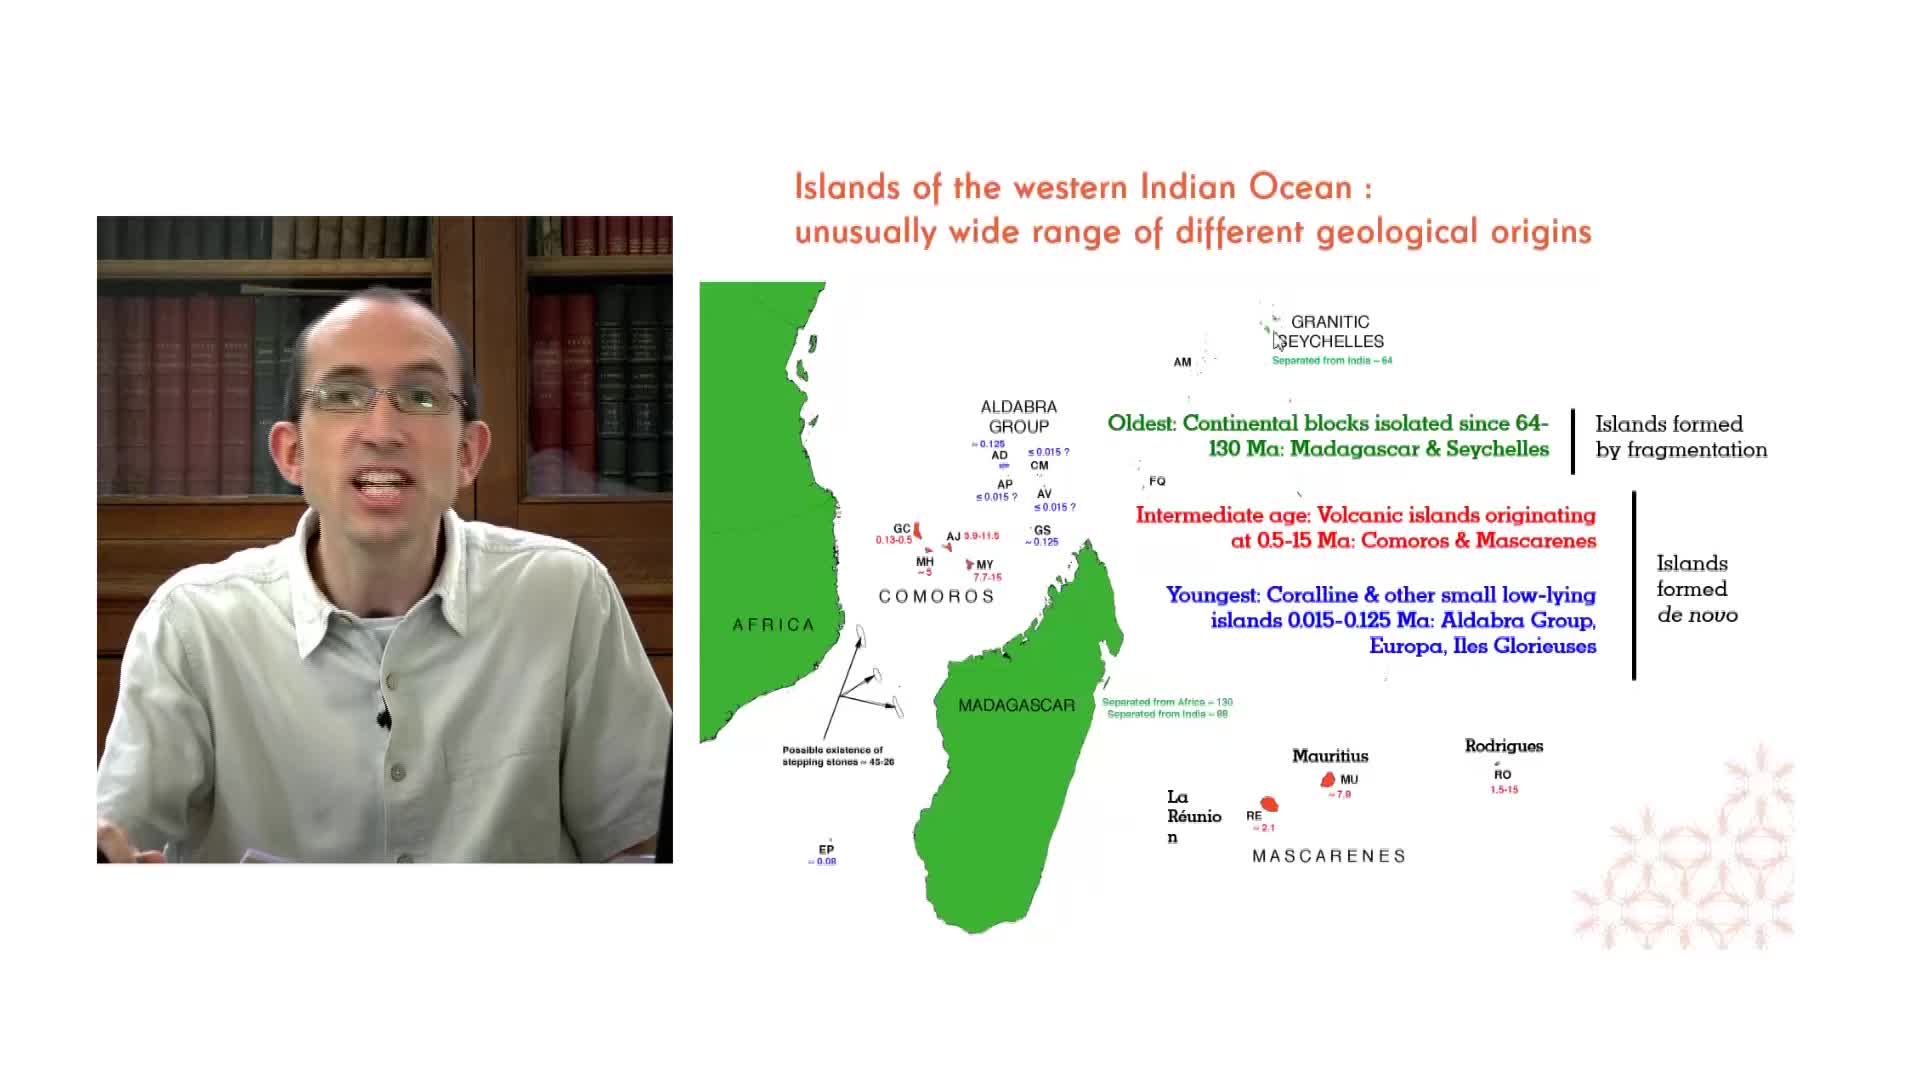 Case study : Origins of Western Indian Ocean insect diversity